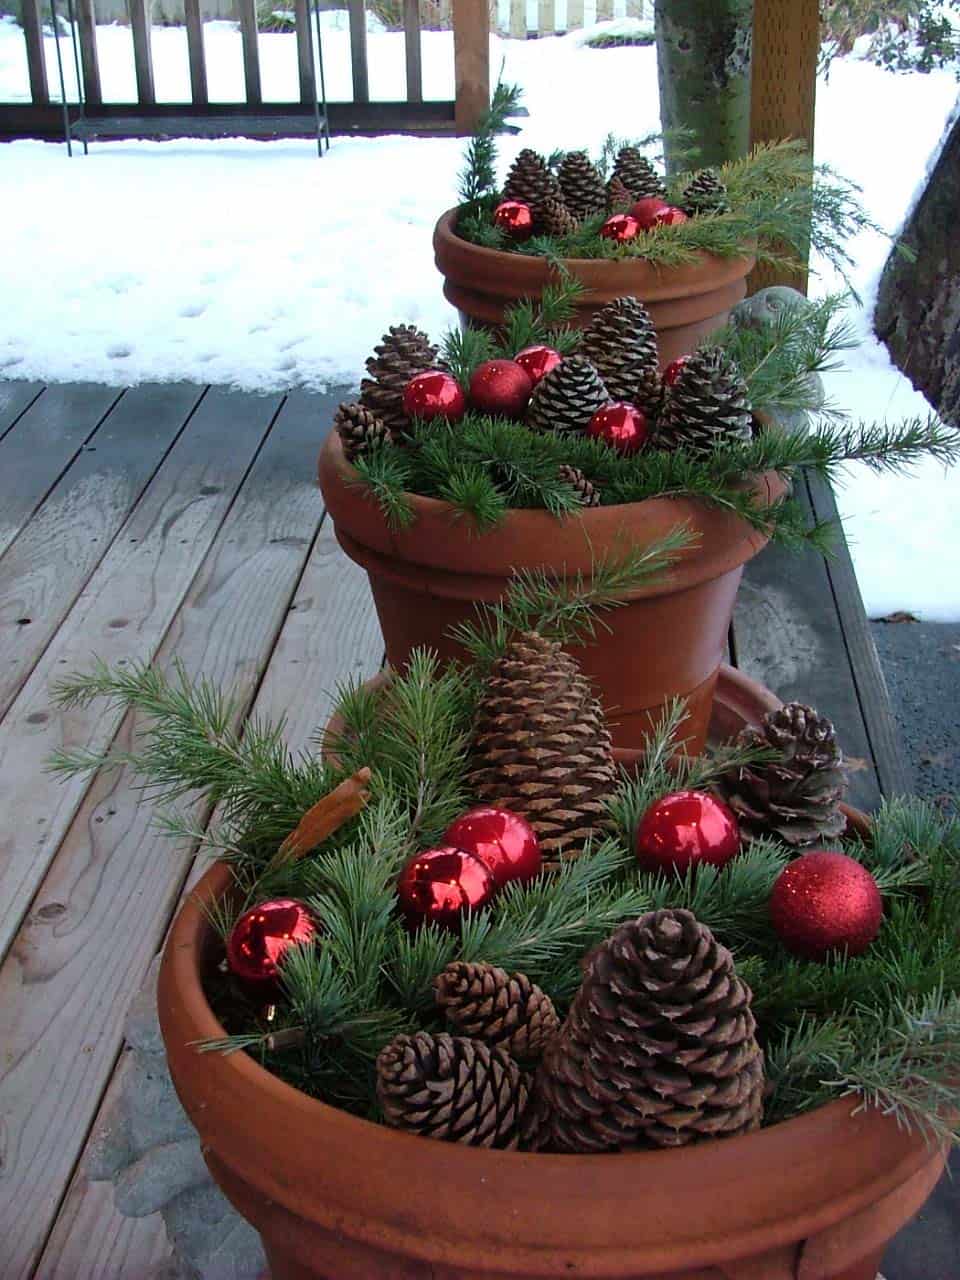 Pots filled with Christmas decor.